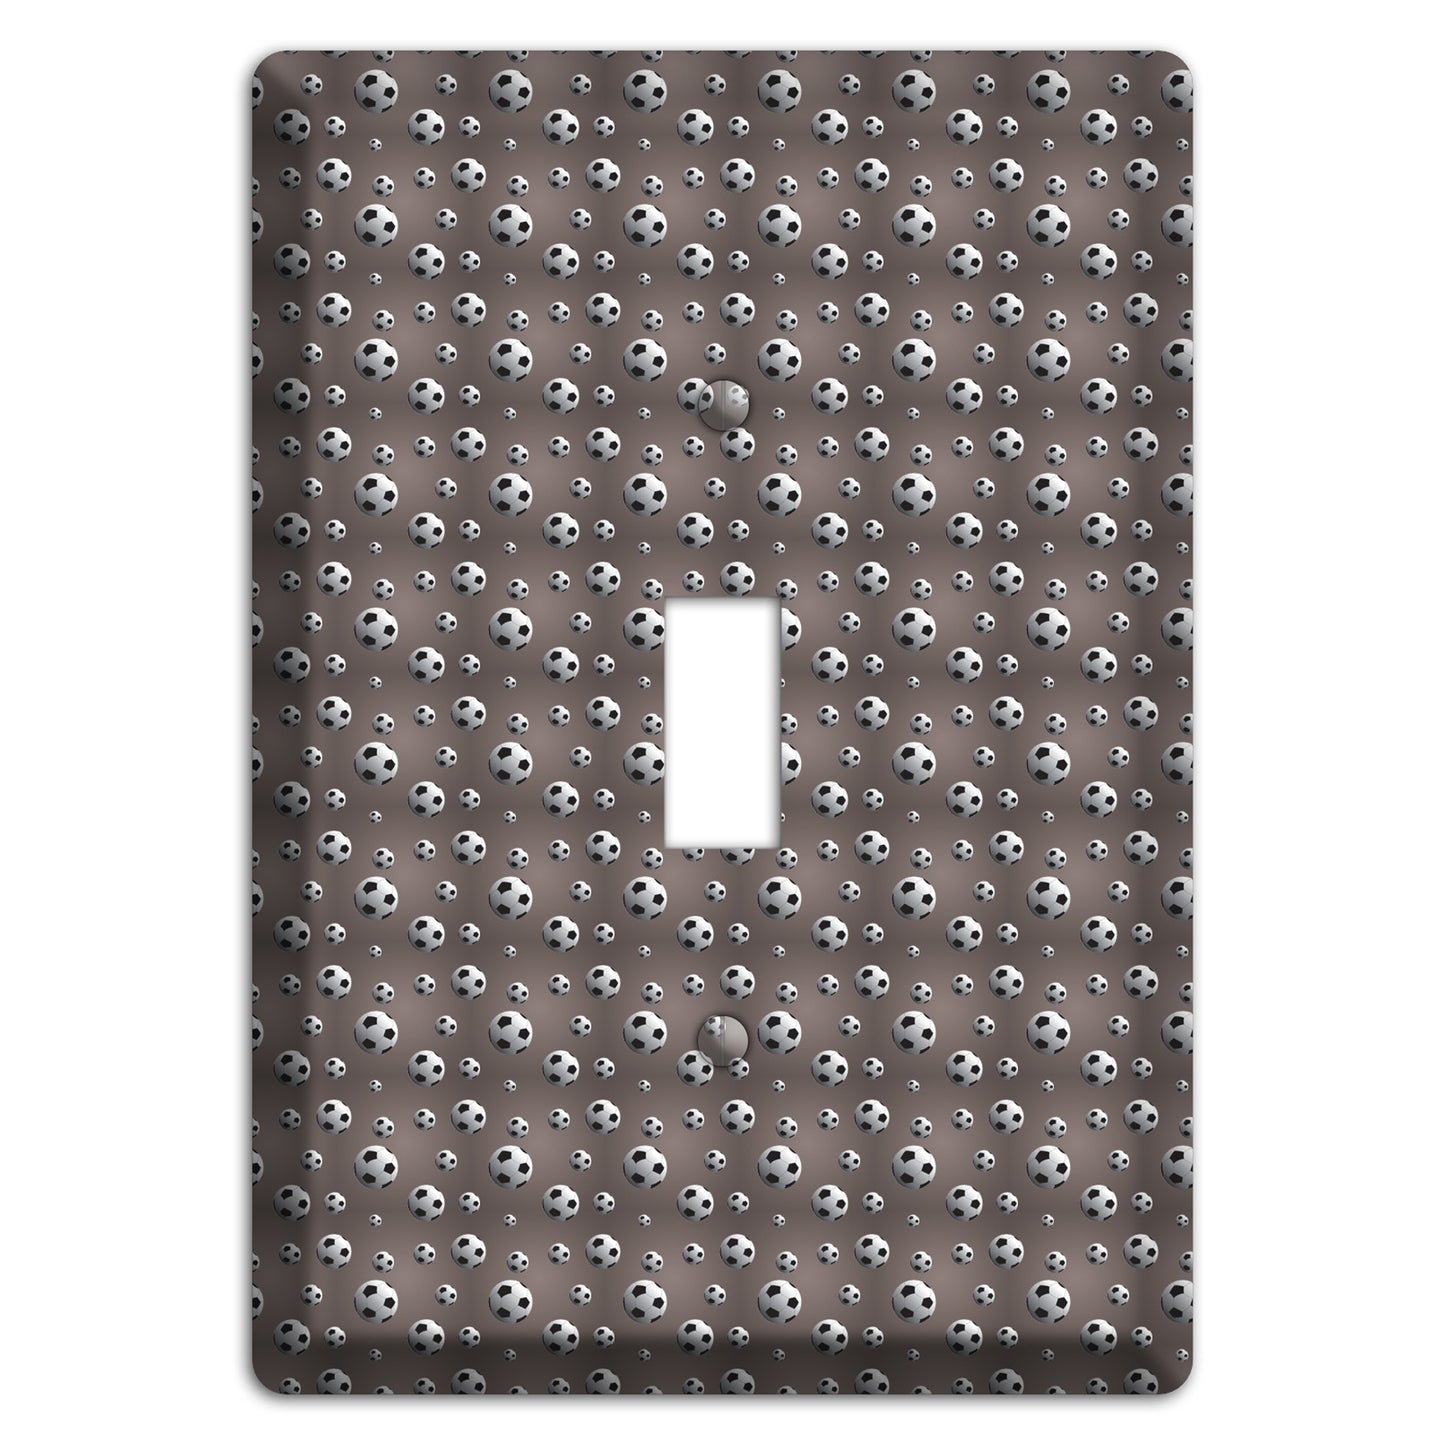 Grey with Soccer Balls Cover Plates